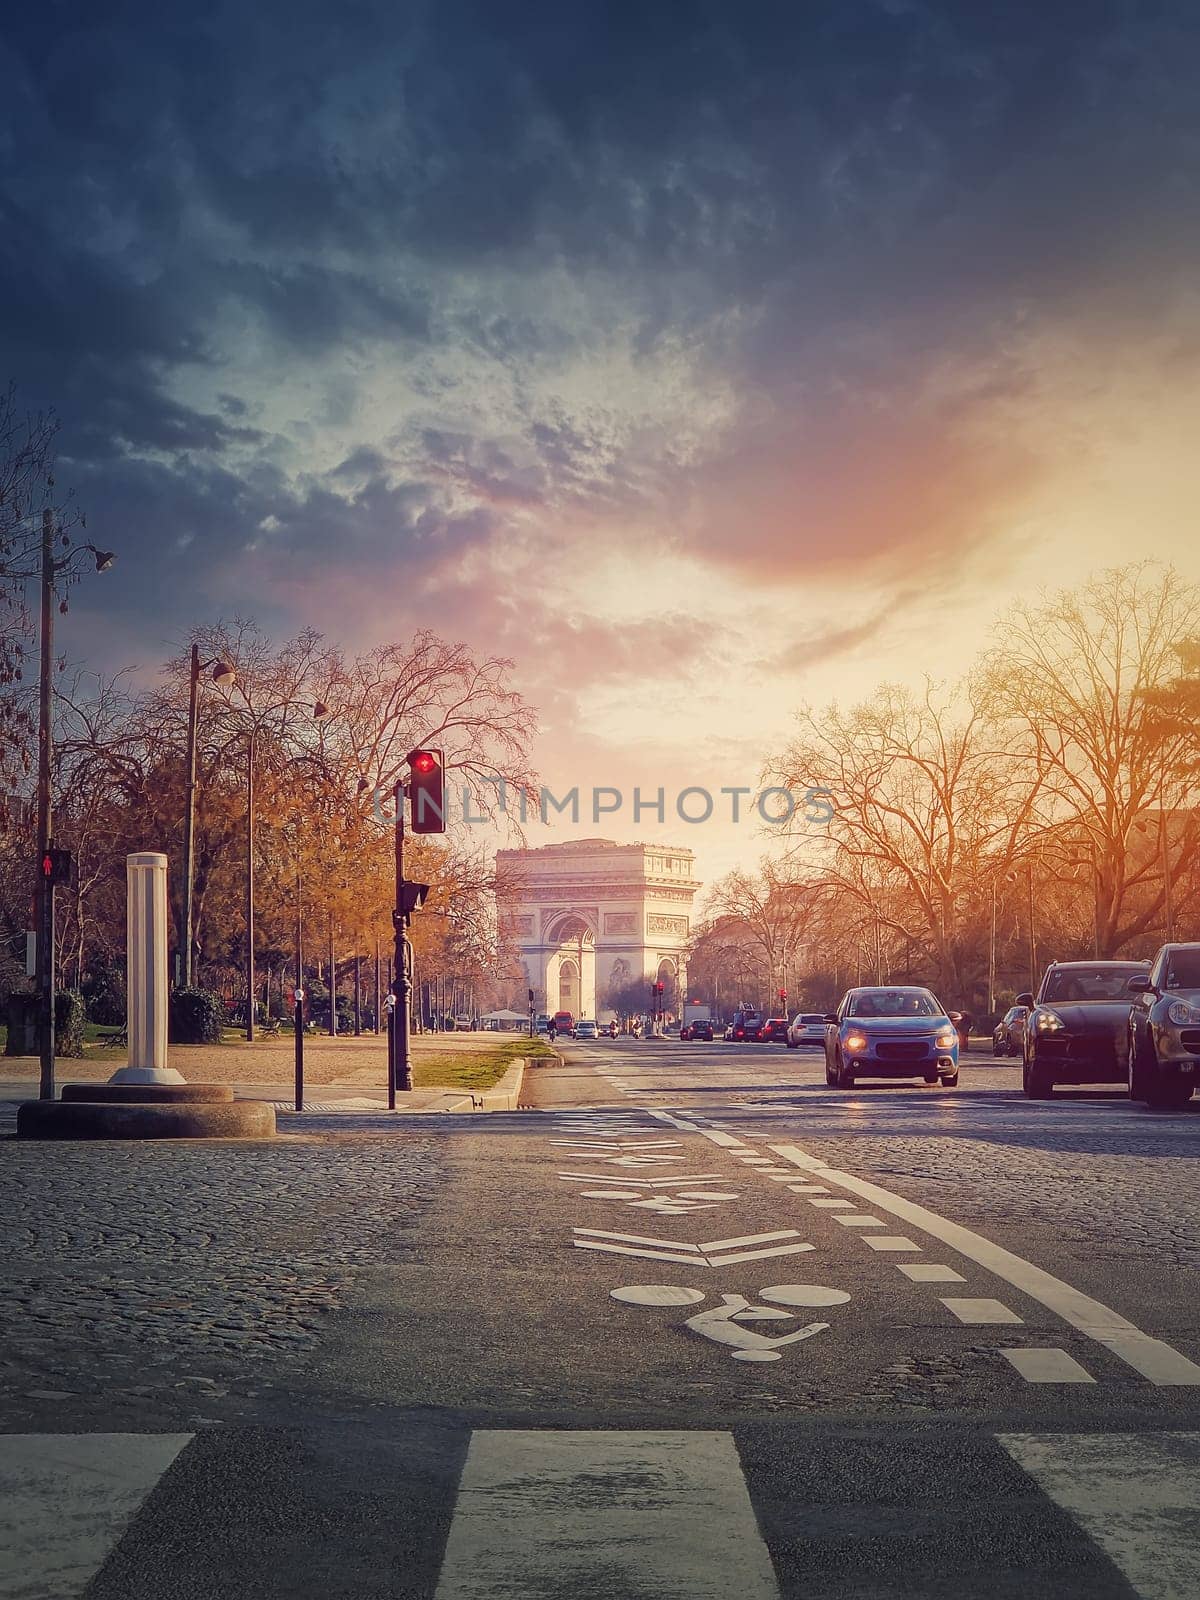 Triumphal Arch (Arc de triomphe) in Paris, France. The famous historic landmark in sunset light seen from the city street with busy traffic by psychoshadow